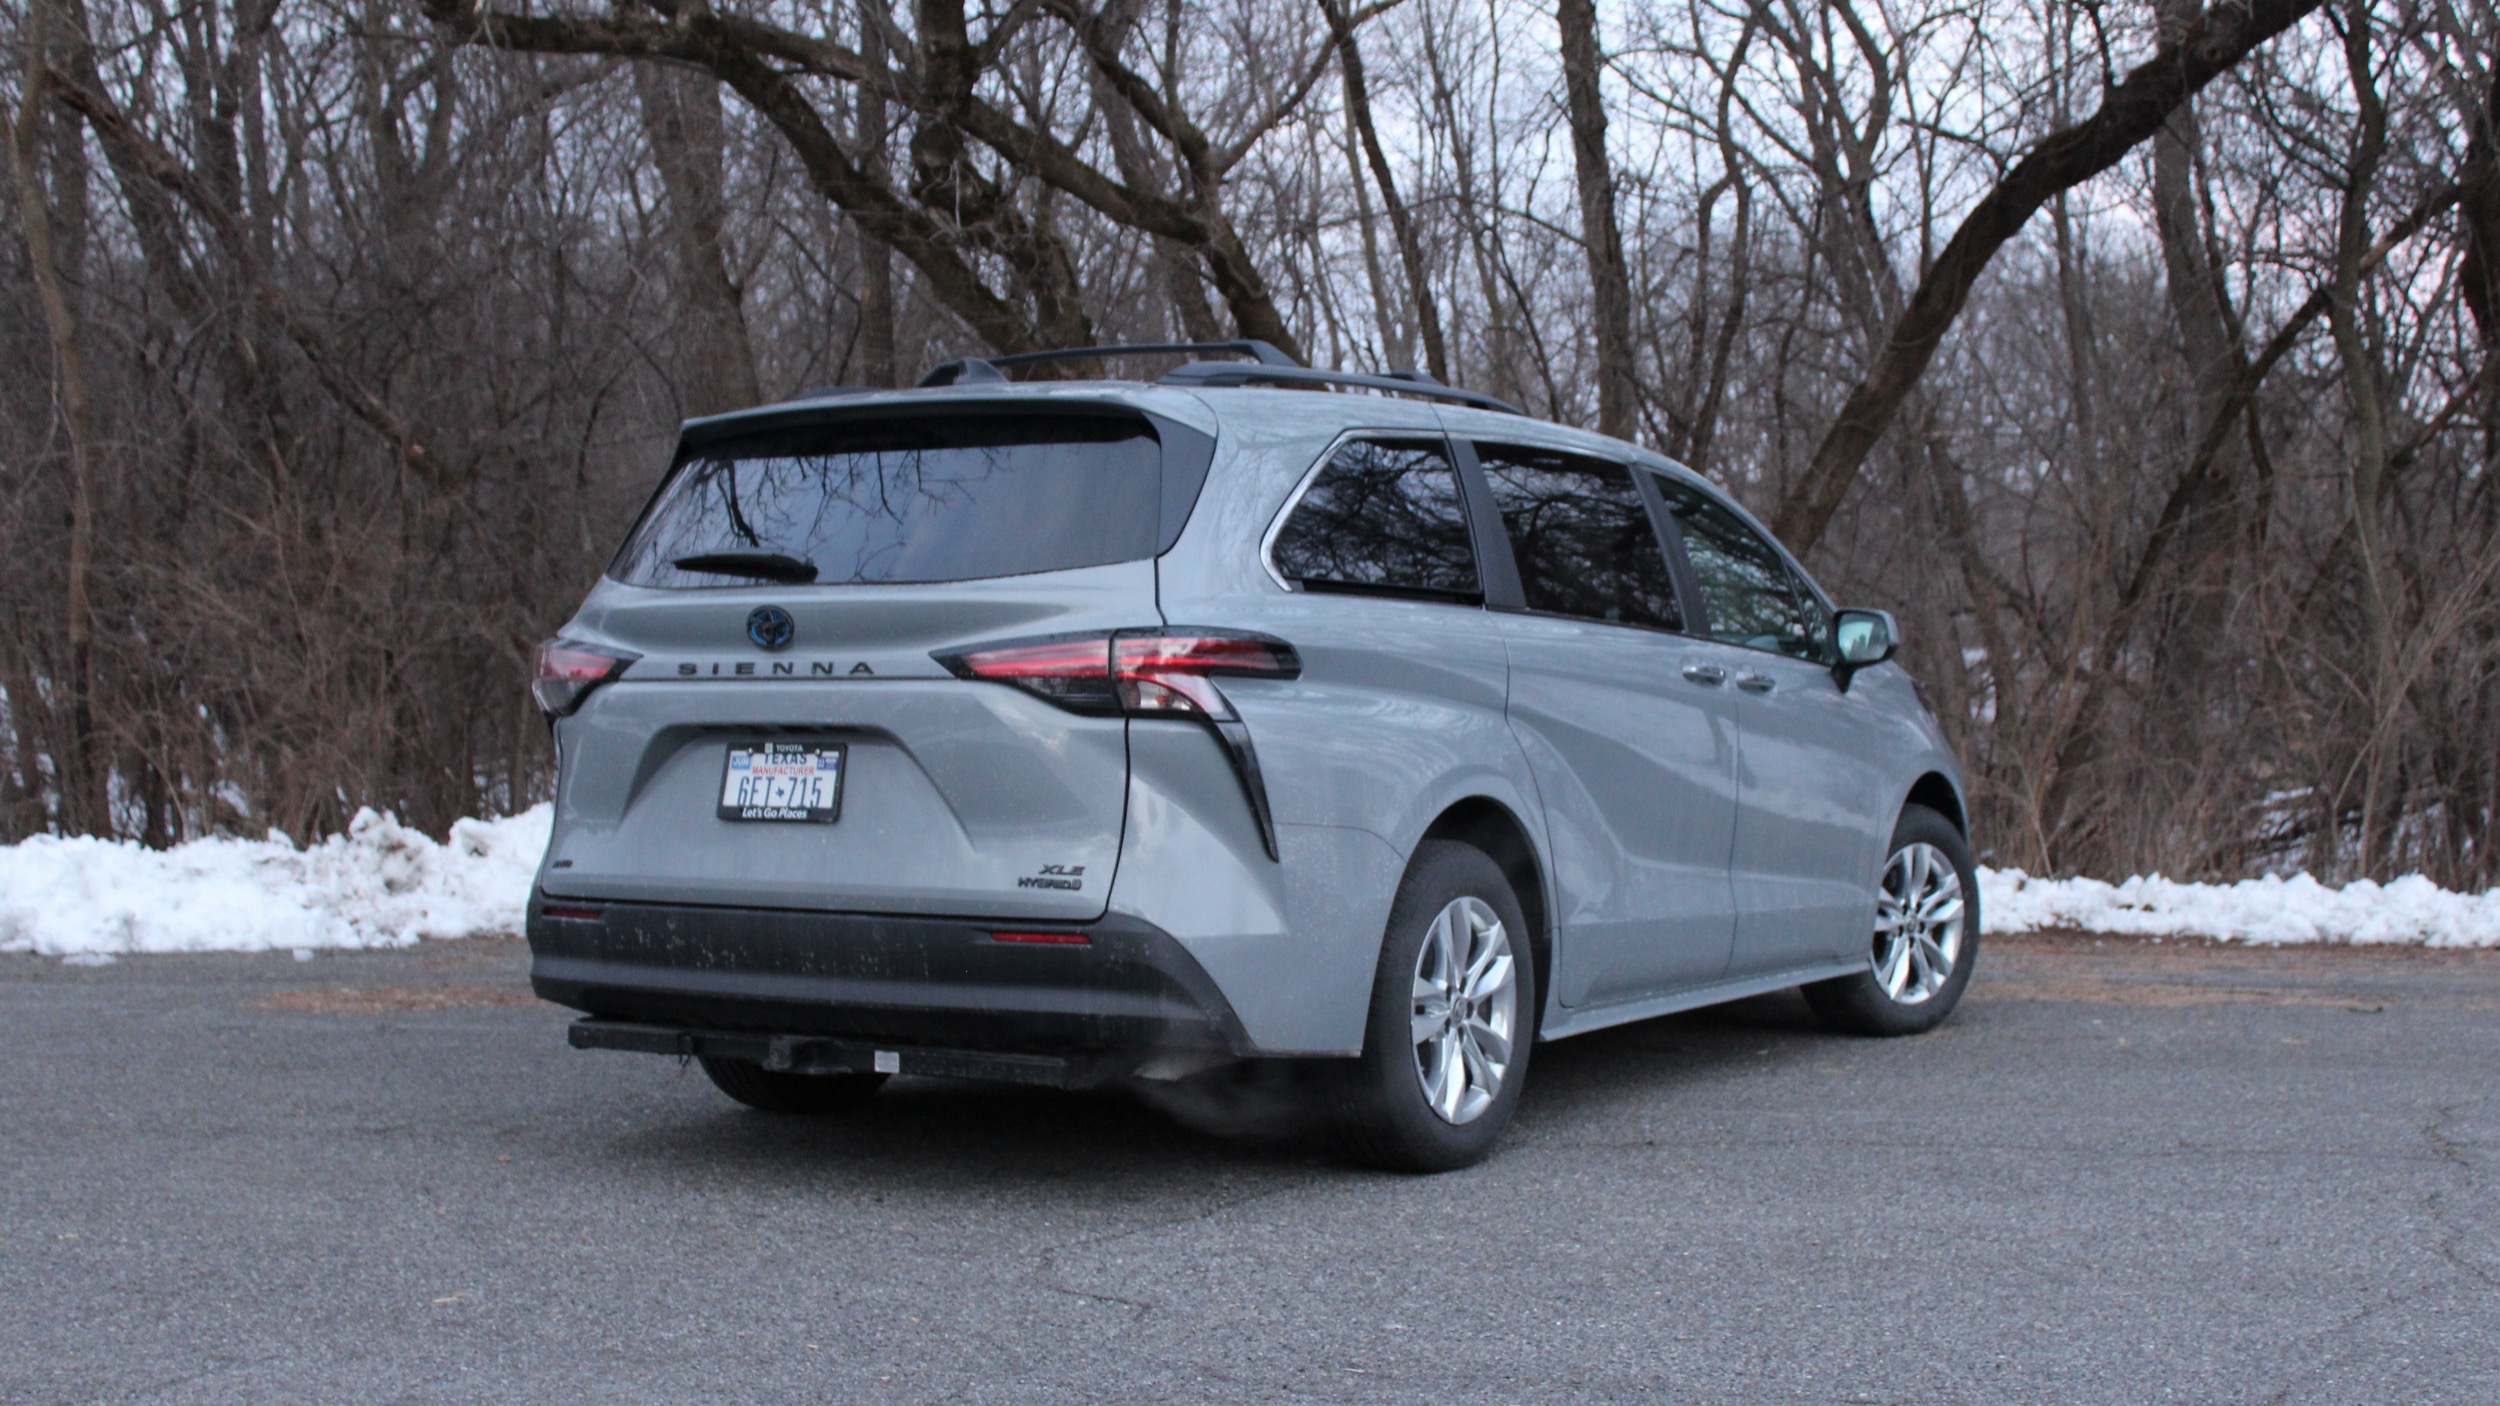 2022 Toyota Sienna Woodland Edition First Drive Review Not woodsy